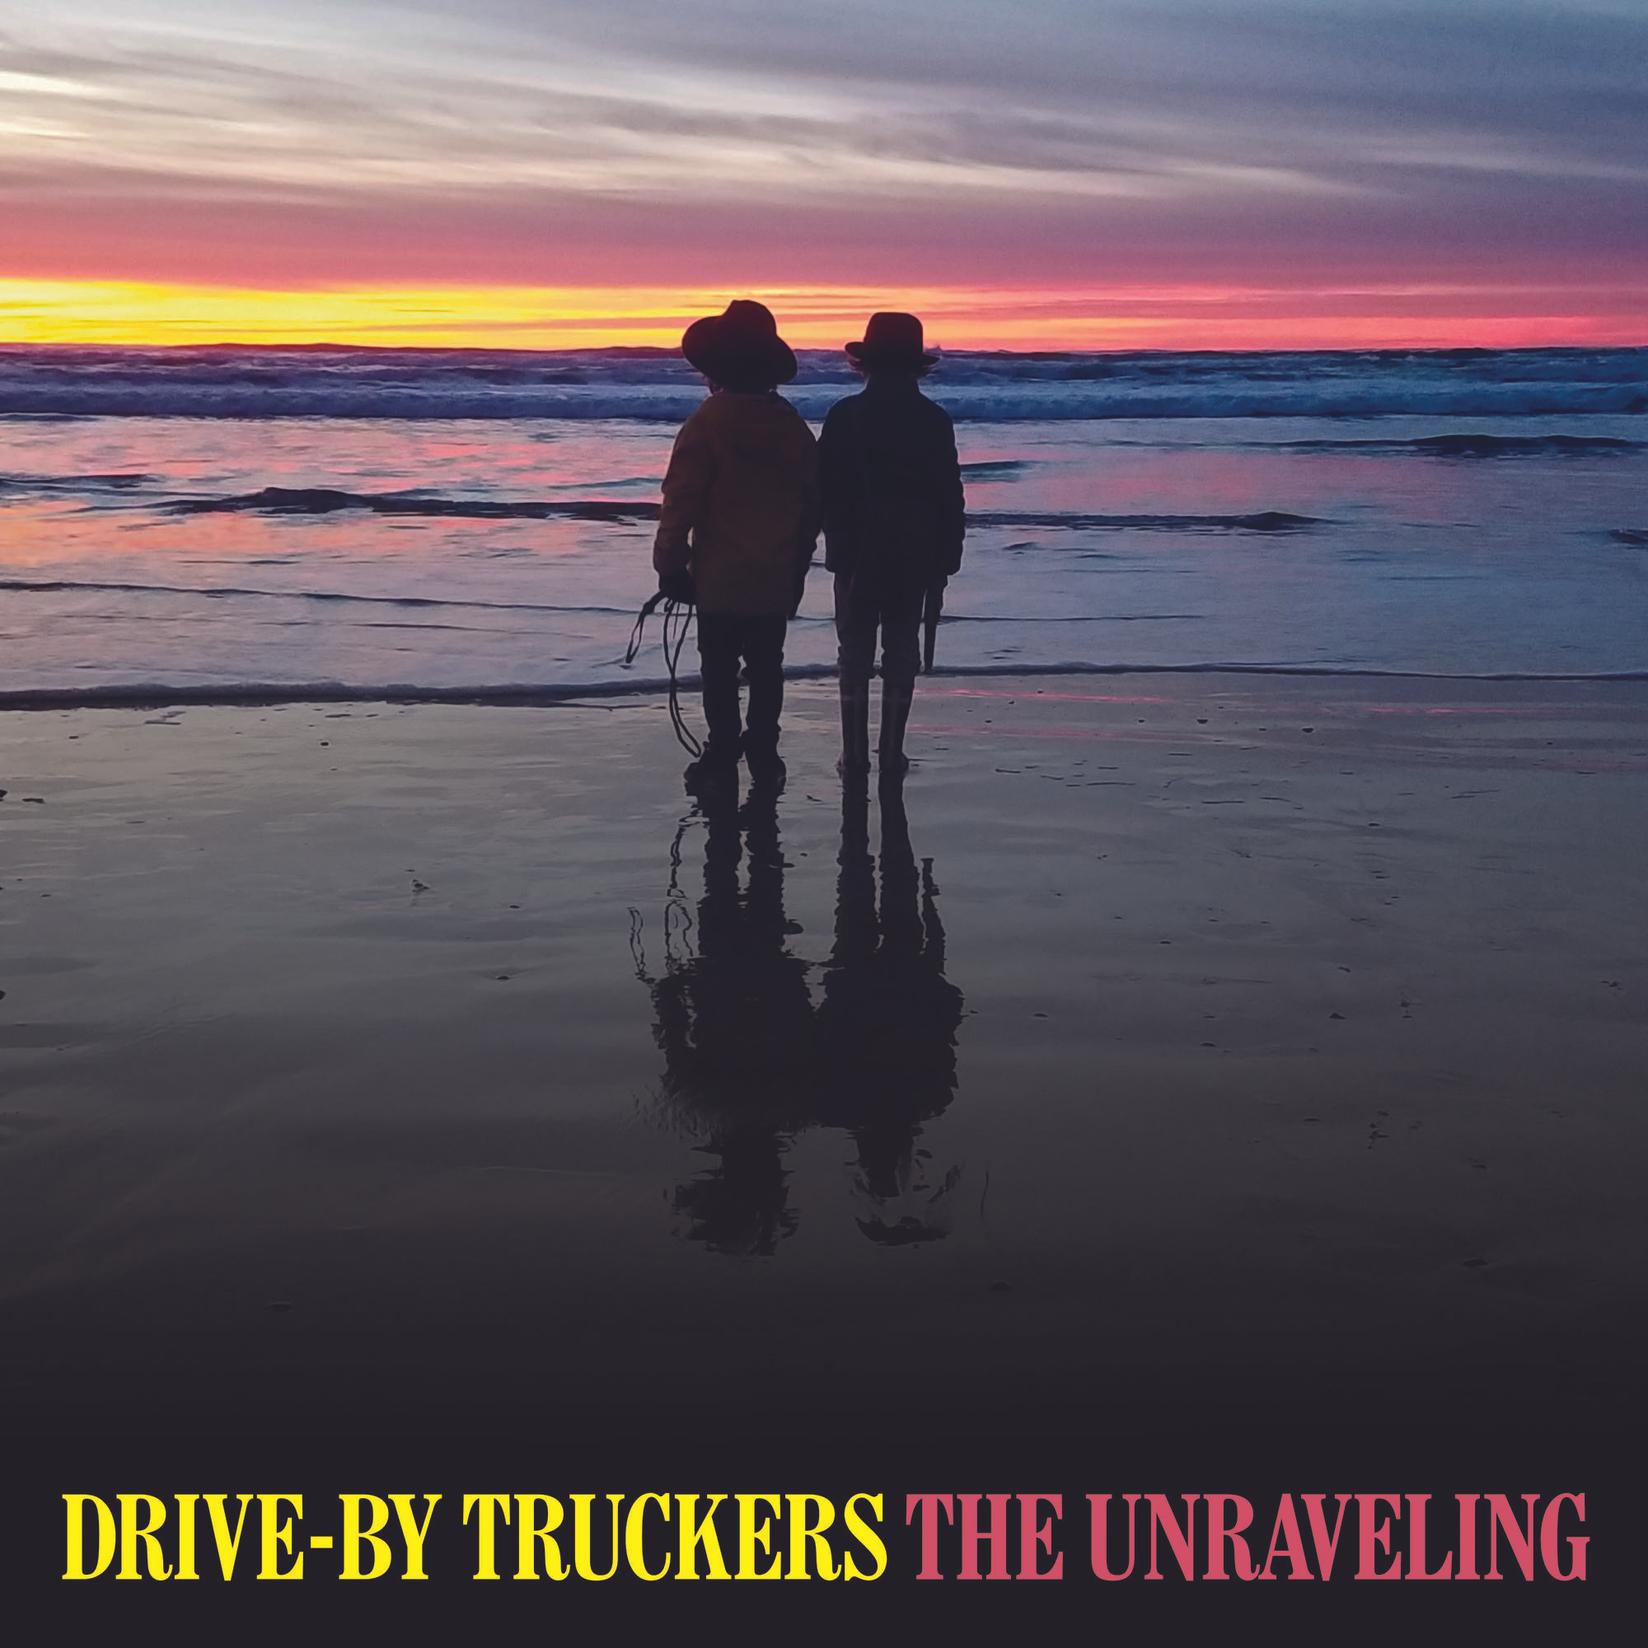 DRIVE-BY TRUCKERS - The Unraveling